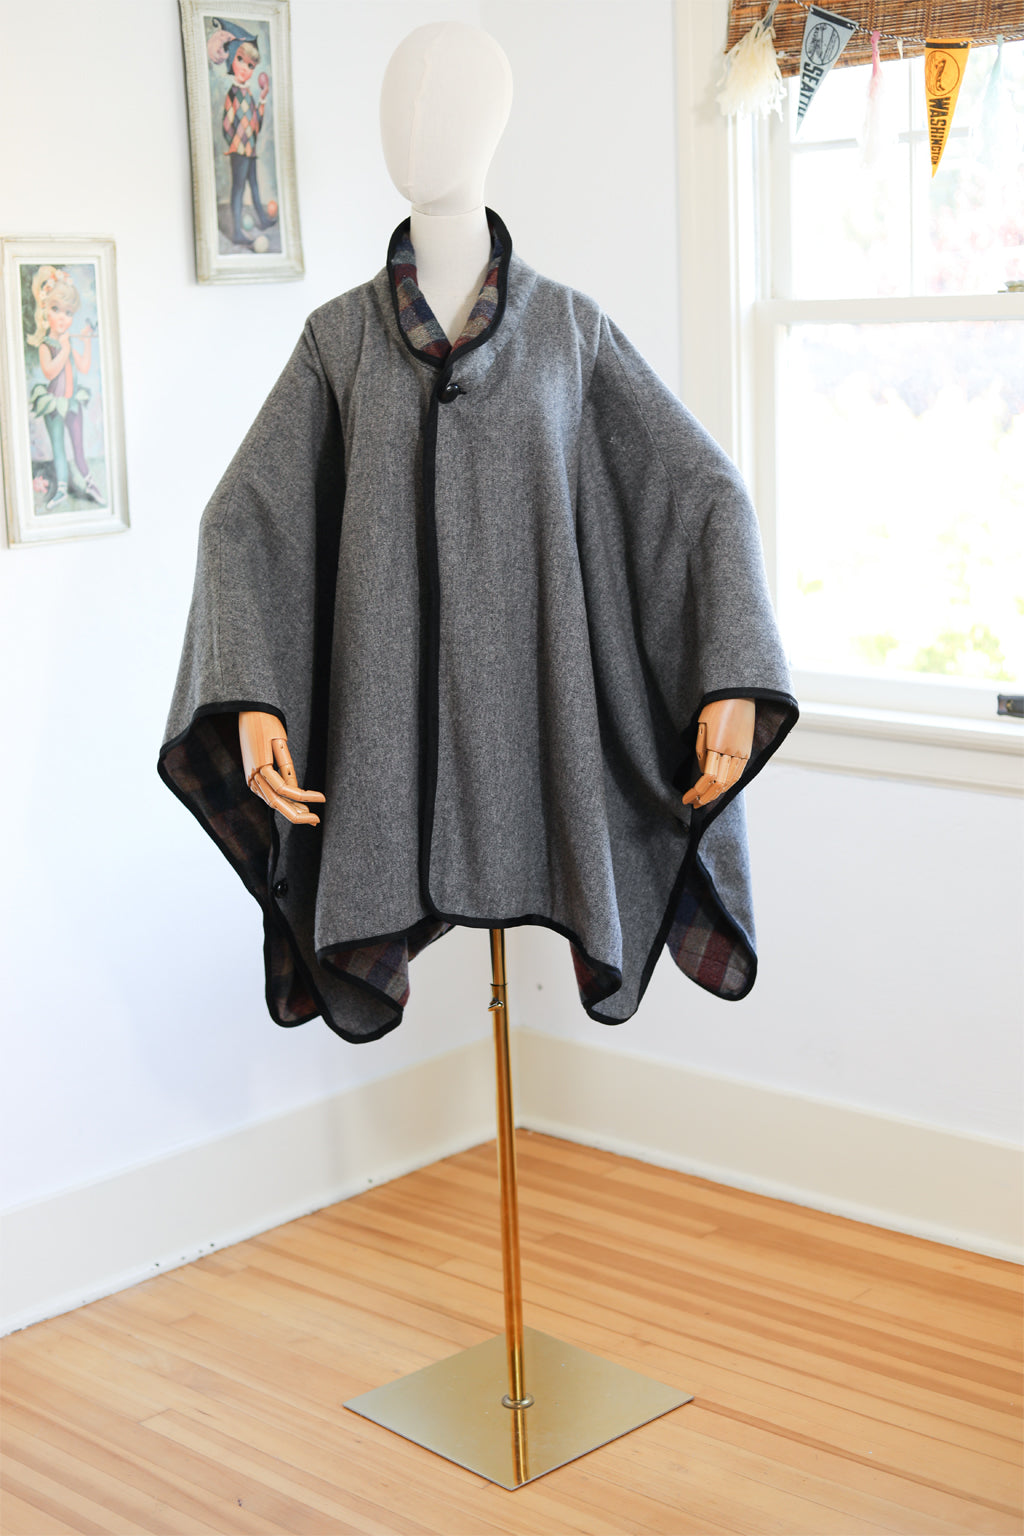 Vintage 1960s Reversible Wool Cape - Cozy Cloak Poncho Reverses from Moody Blue + Plum Plaid to Stormy Grey - Fits Most